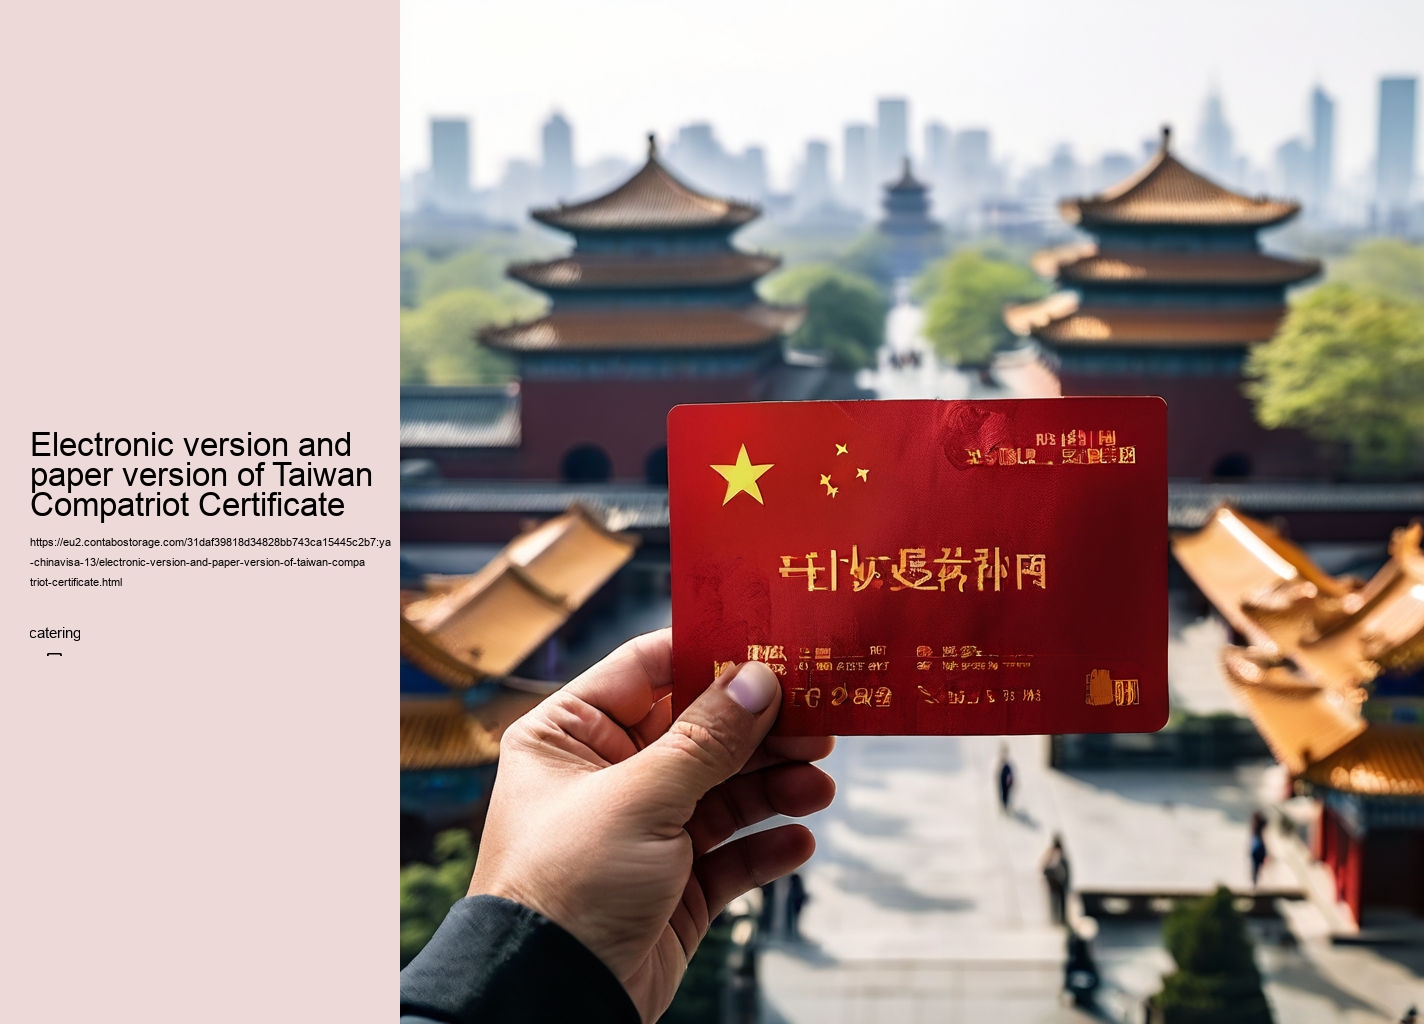 Electronic version and paper version of Taiwan Compatriot Certificate